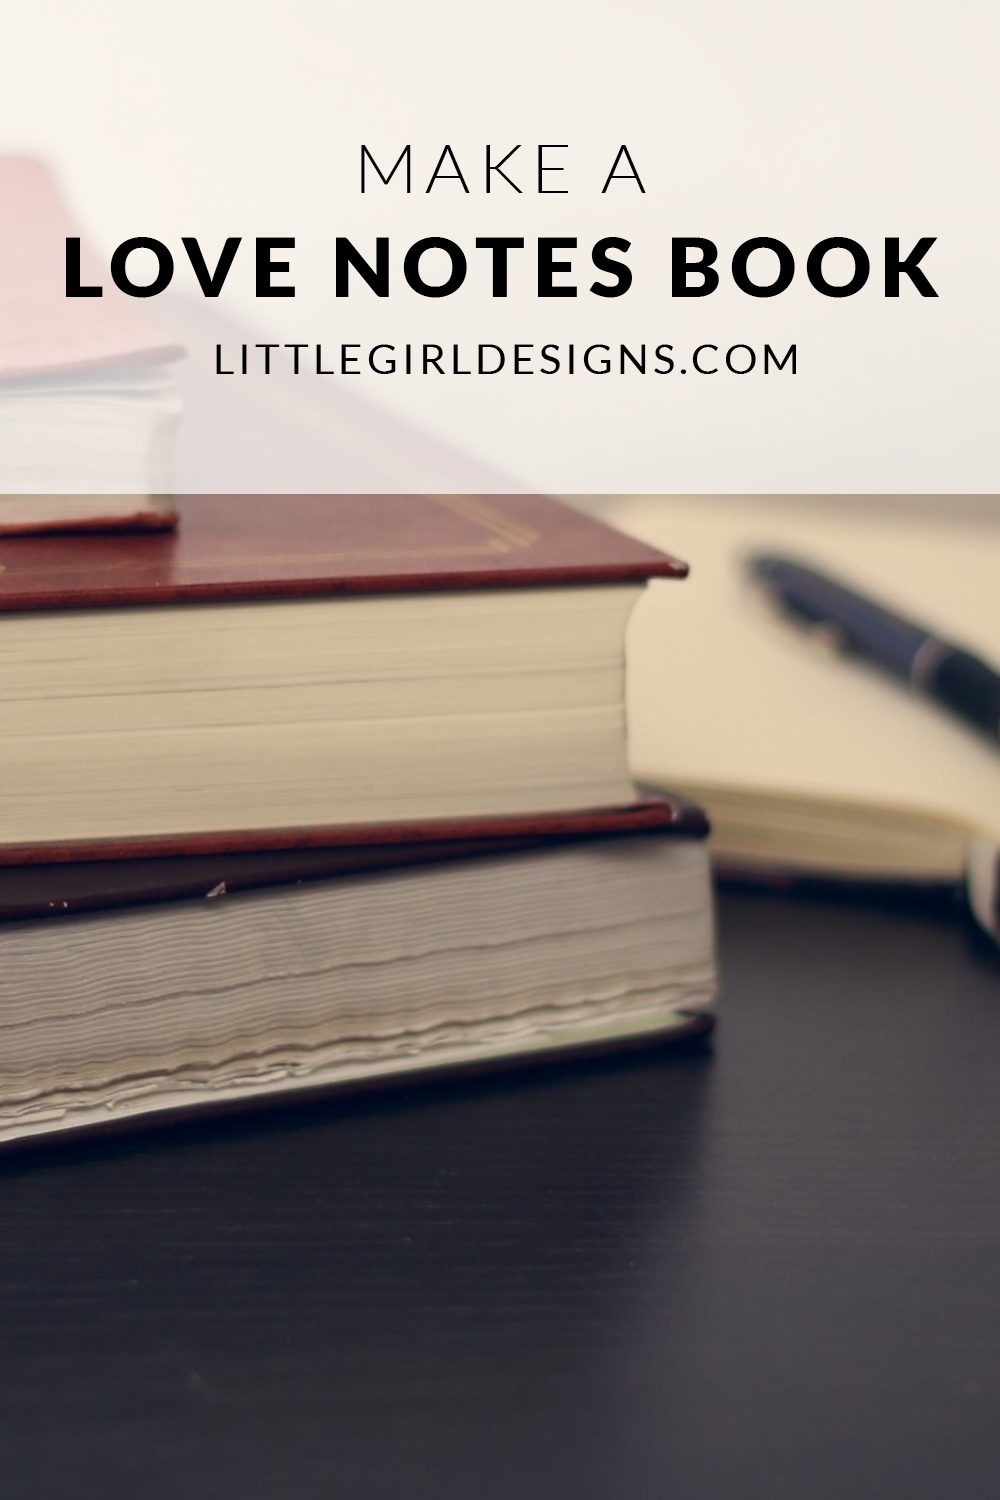 How to Make a Love Notes Book - the perfect gift for a wedding, anniversary, Valentine's Day, or a birthday. I'll show you how to make one @ littlegirldesigns.com